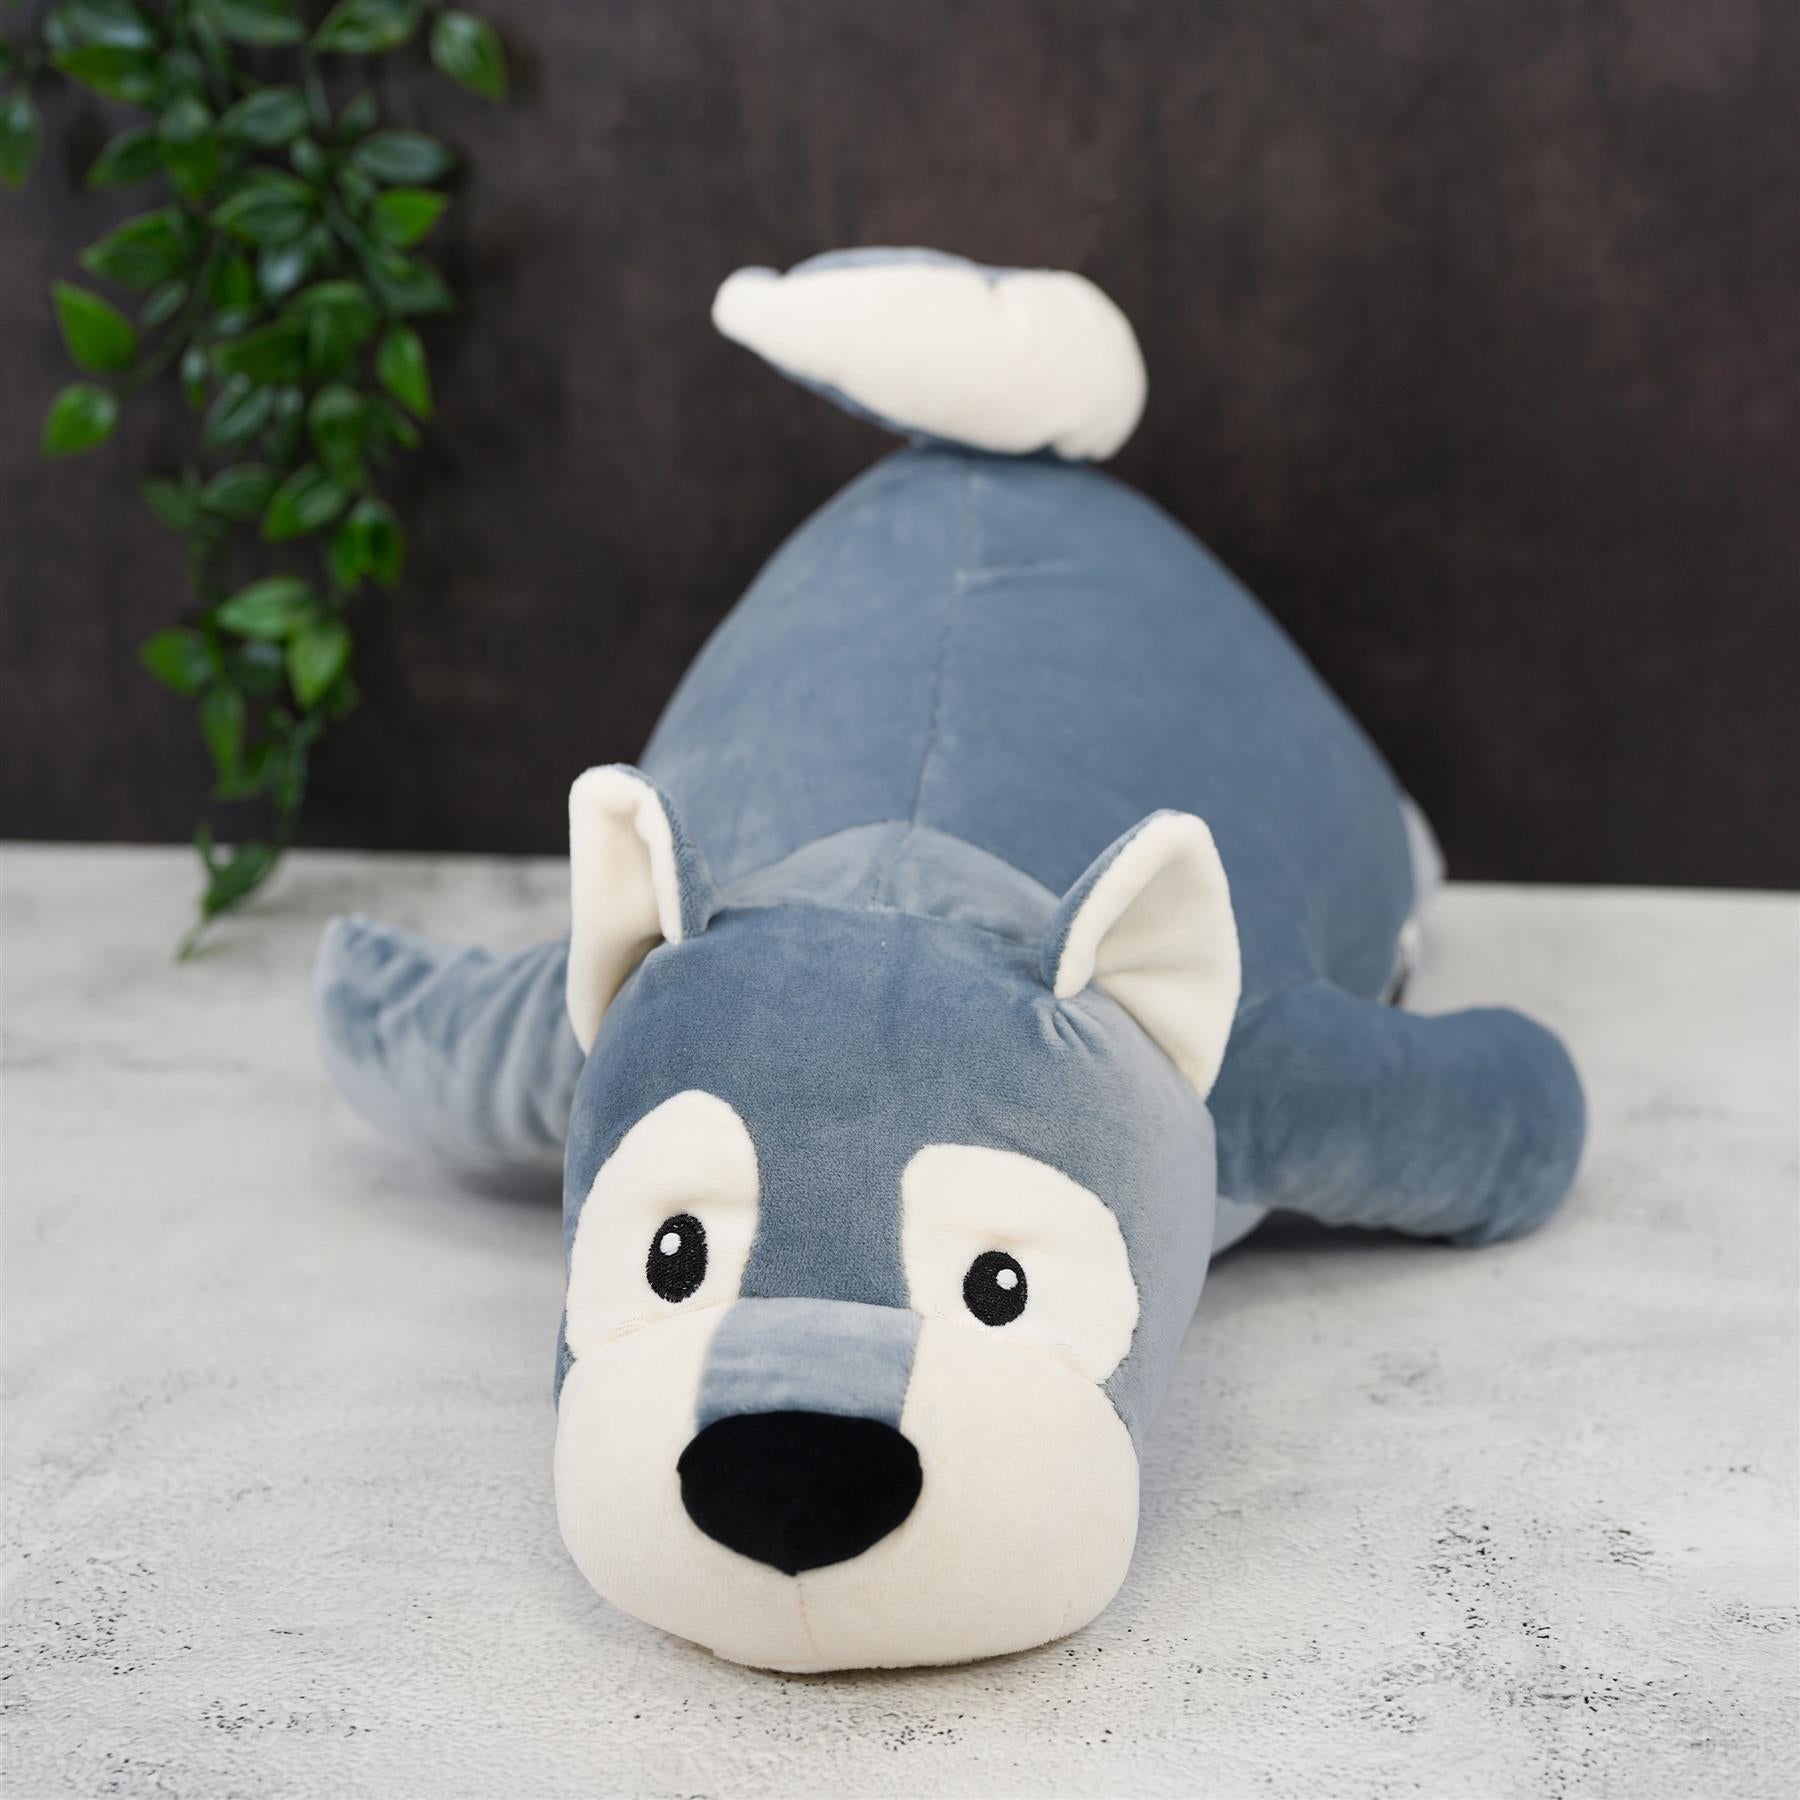 20” Super-Soft Wolf Plush Pillow Toy by The Magic Toy Shop - The Magic Toy Shop